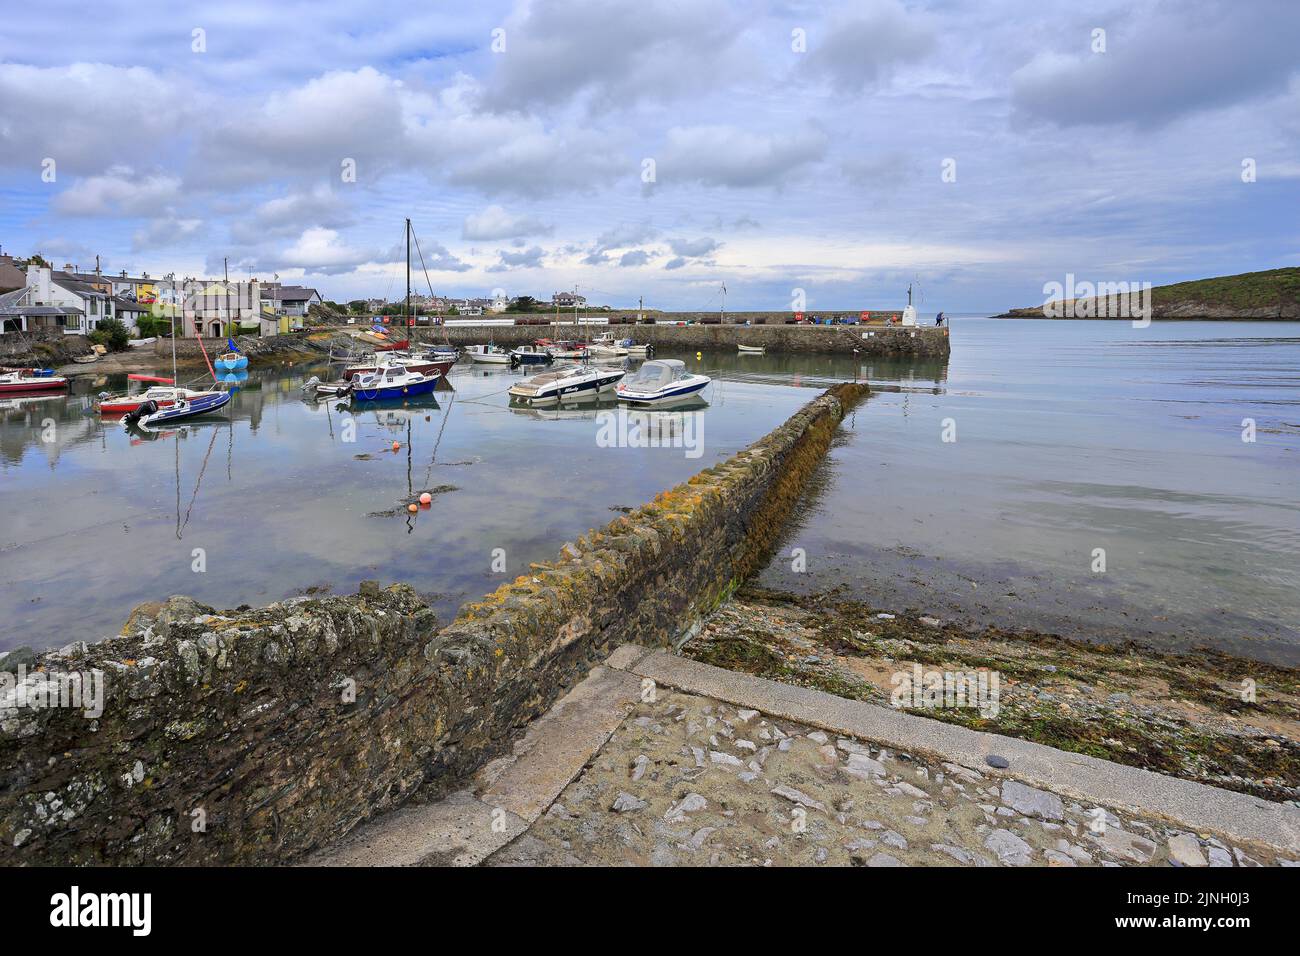 Camaes Bay harbour, Isle of Anglesey, Ynys Mon, North Wales, UK. Stock Photo